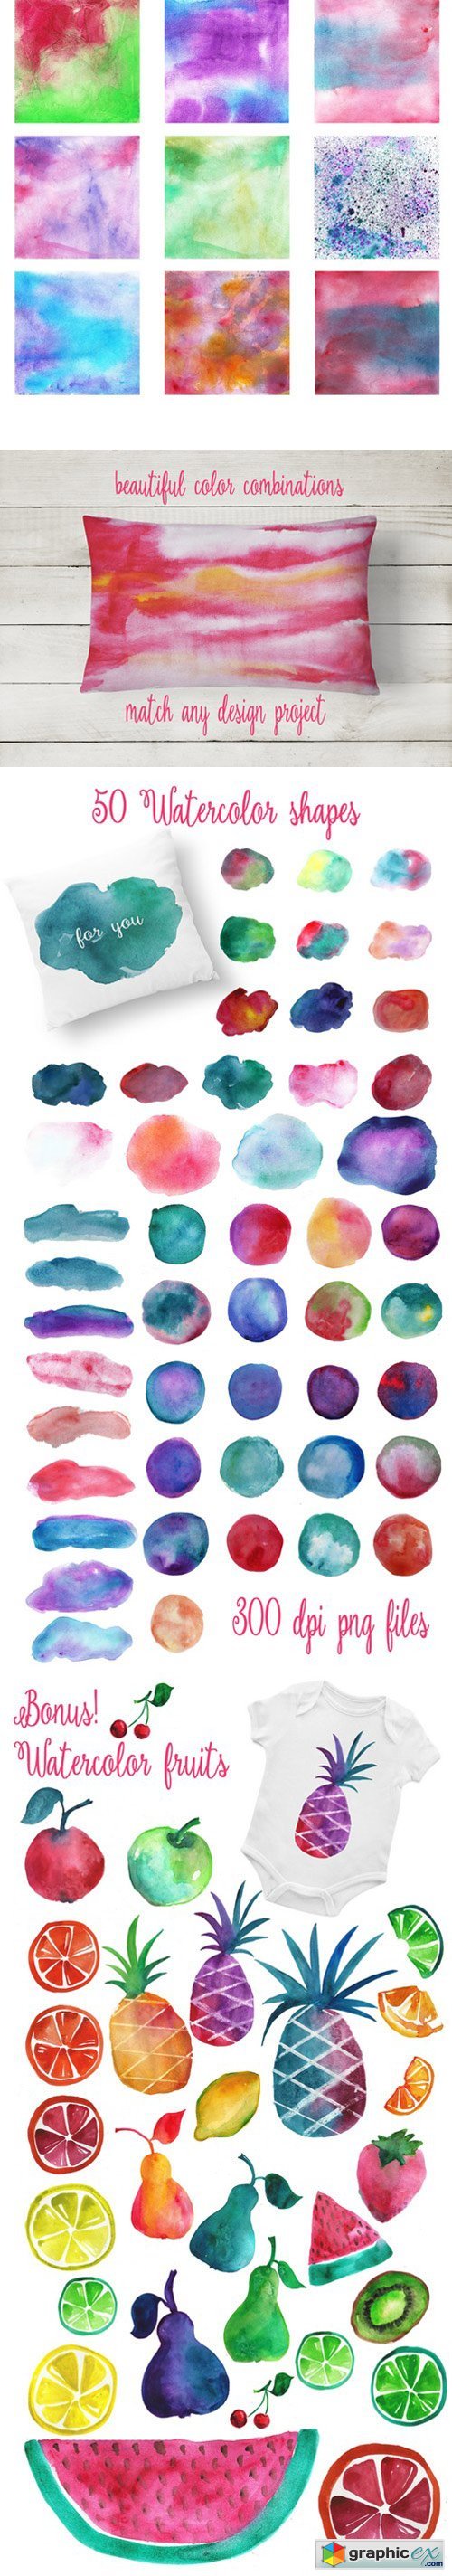 Complet Watercolor Textures Kit